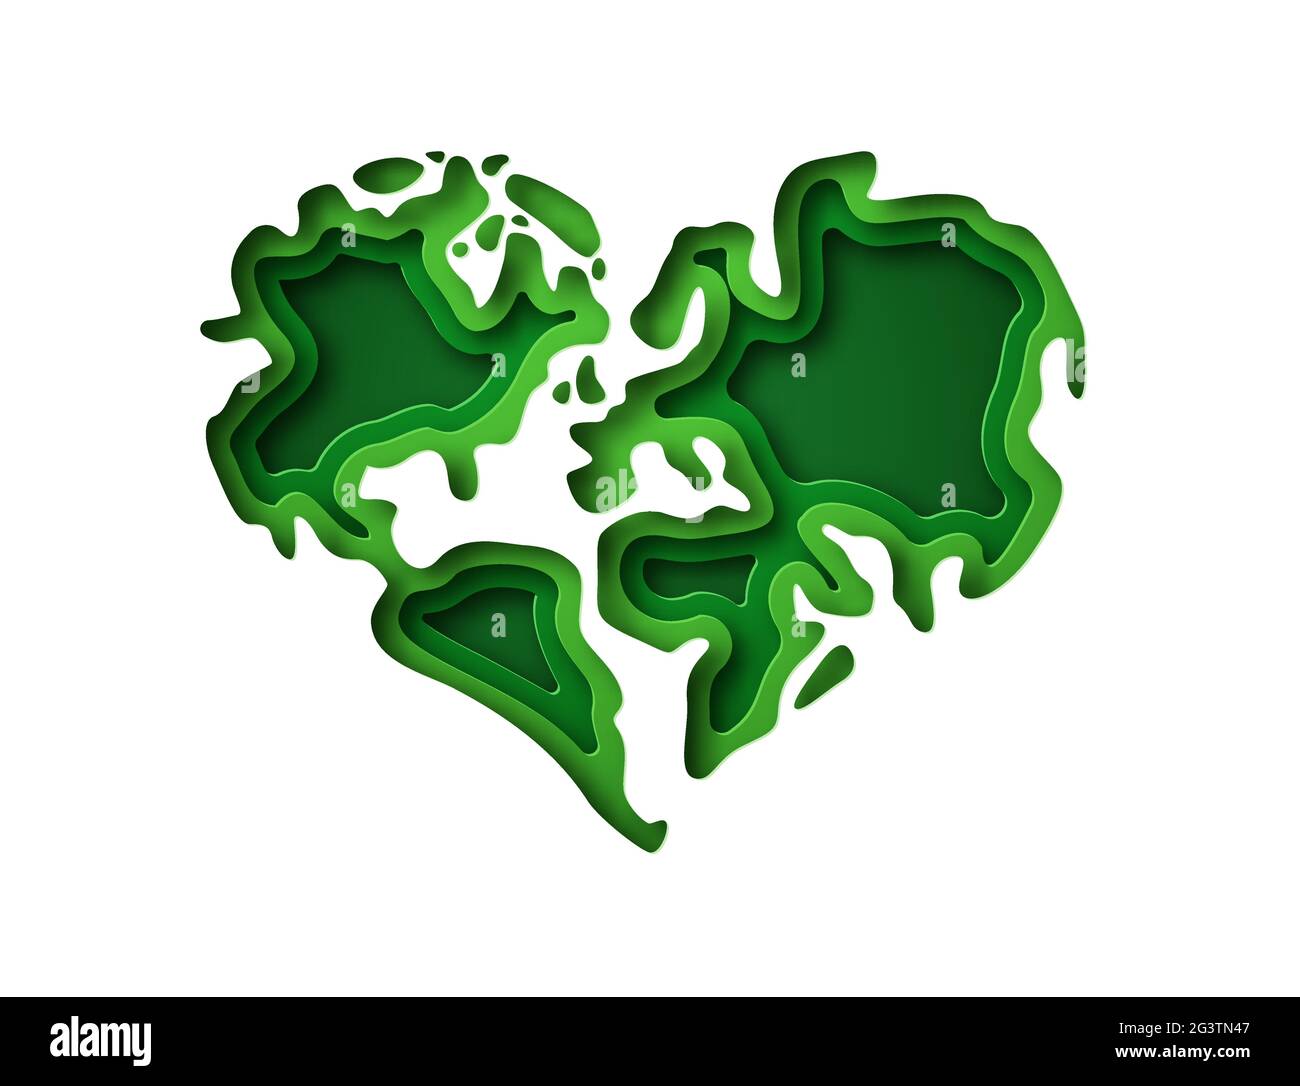 Paper cut earth planet illustration of green heart shape world, layered cutout map. Global environment care concept, 3d origami design on isolated whi Stock Vector